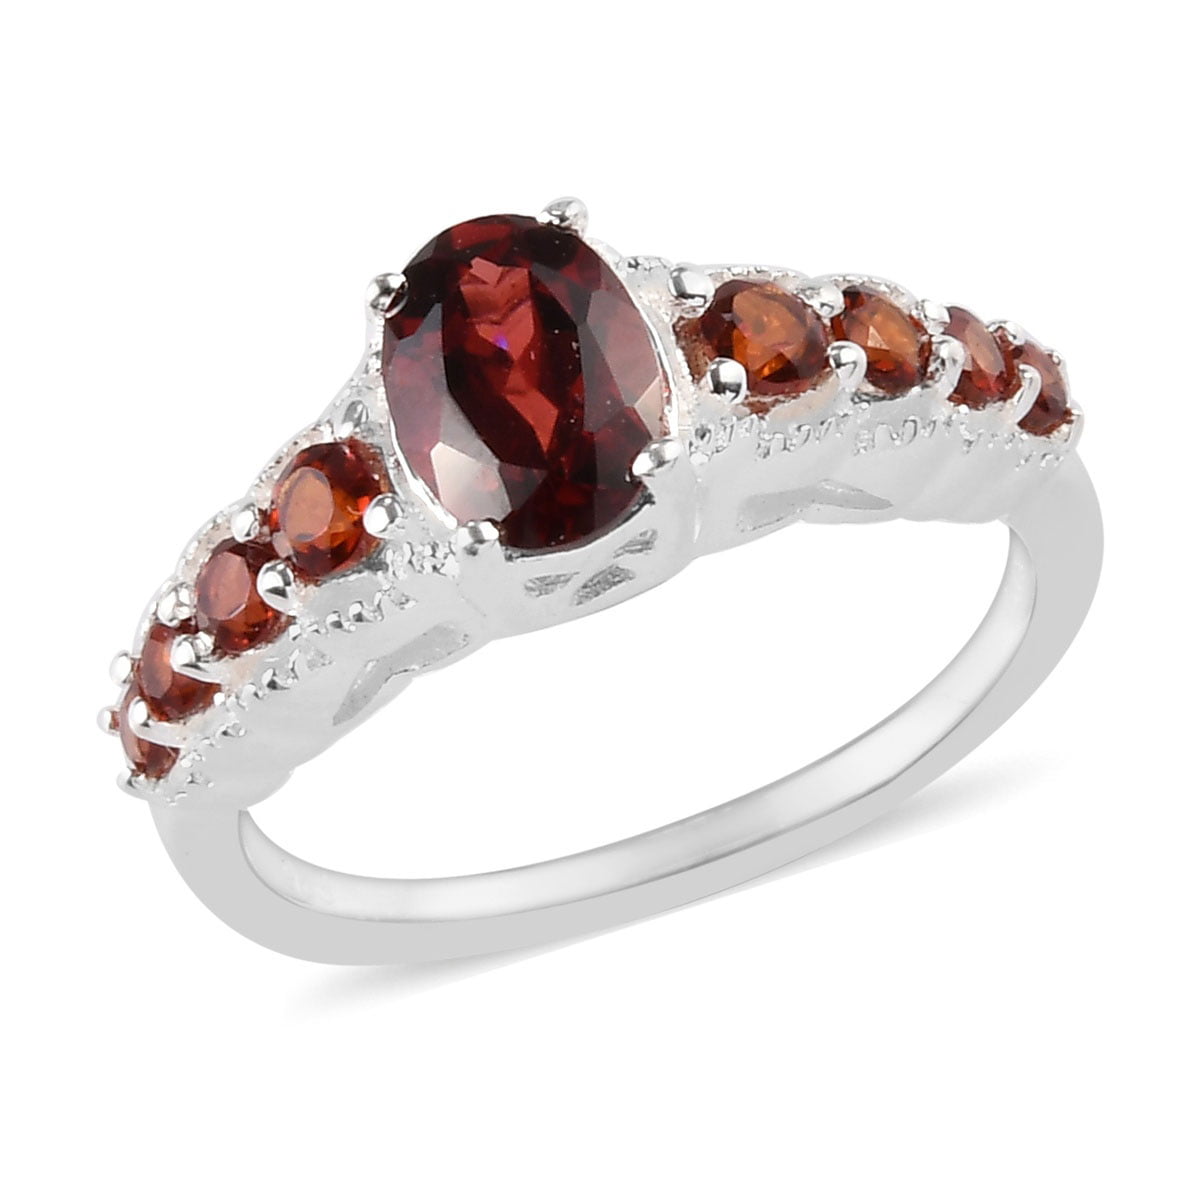 Diamond cluster SALE Size L Art deco design. A beautiful silver and garnet ring 925 silver exquisite and makes a statement